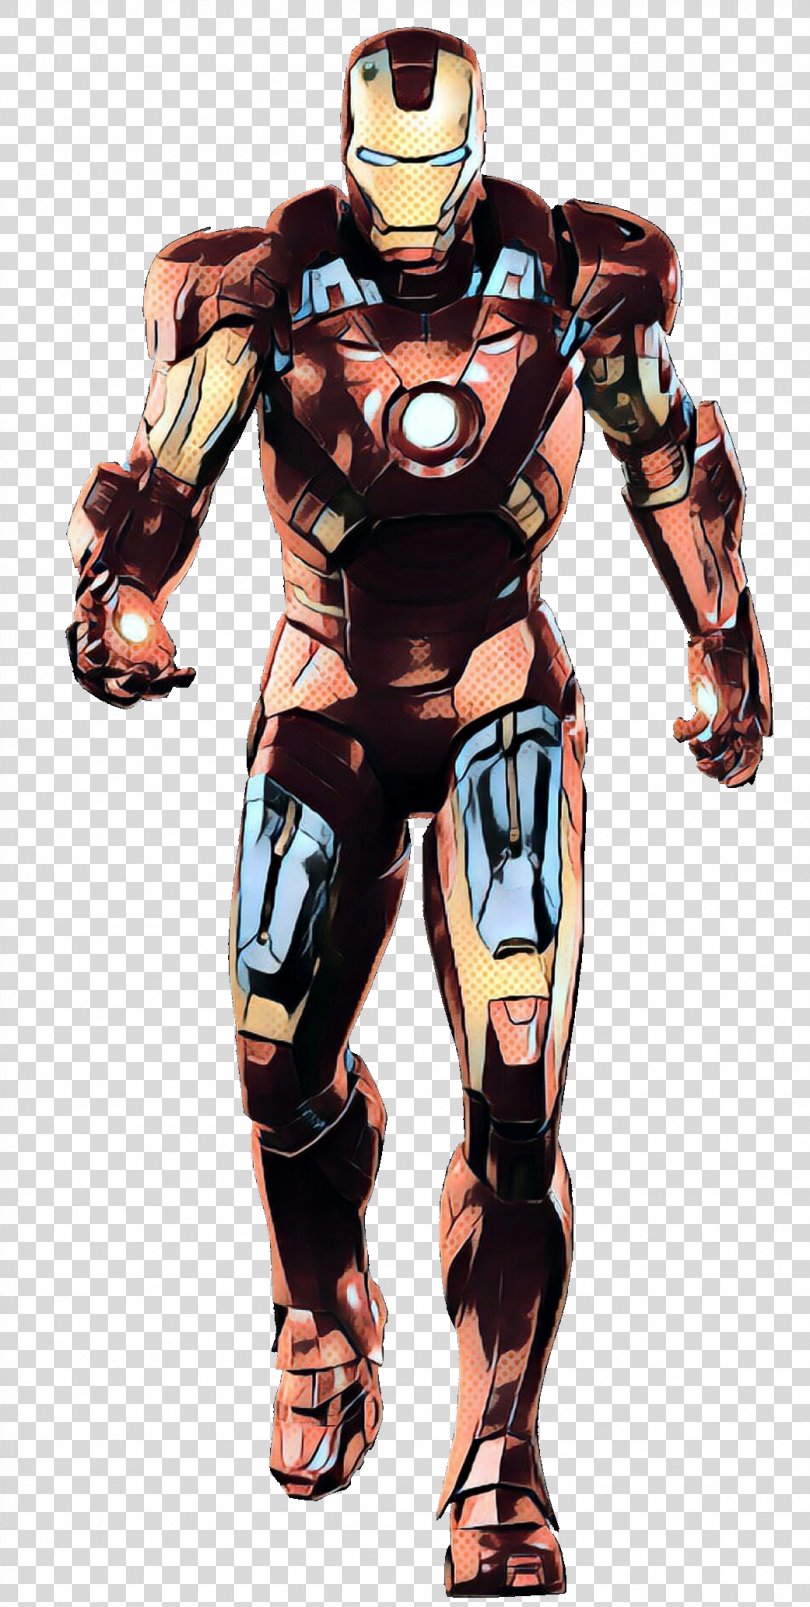 Iron Man's Armor Portable Network Graphics Marvel Cinematic Universe Image PNG